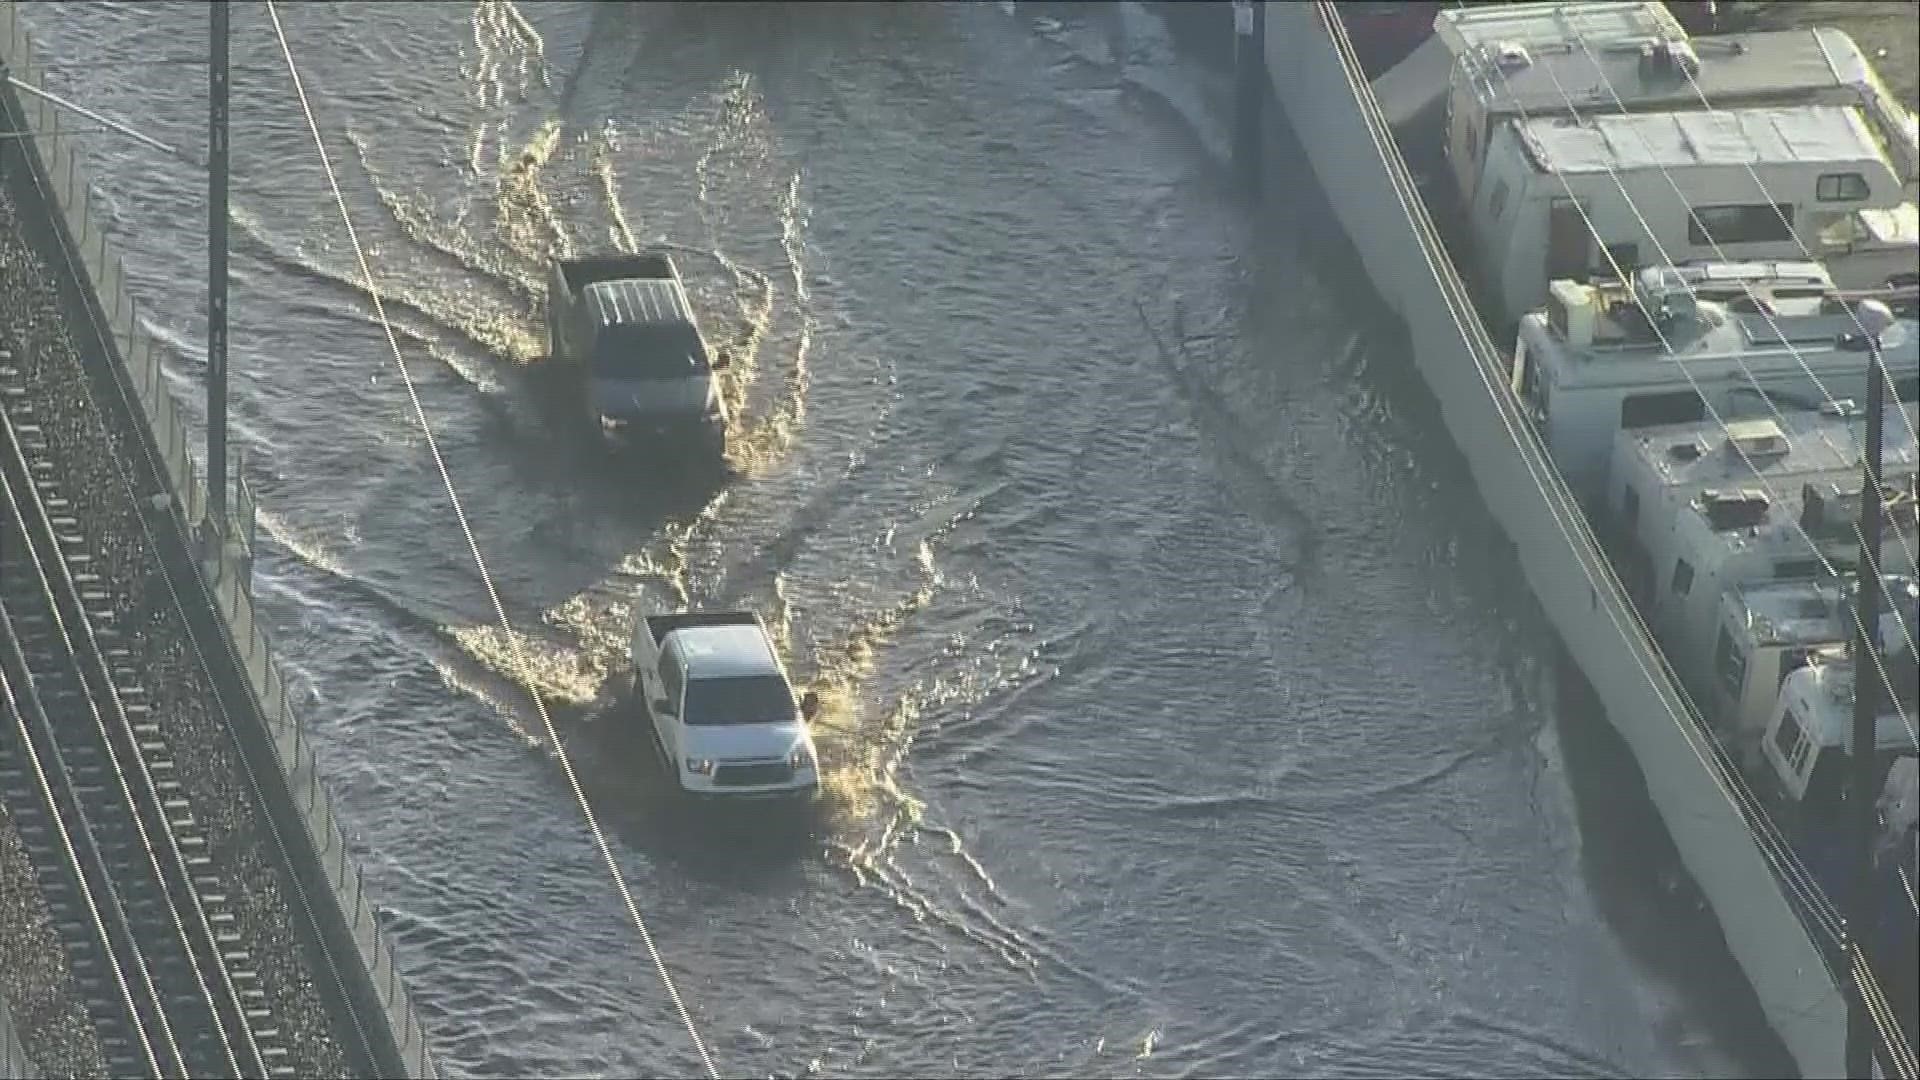 SKY9 was over Brighton Boulevard and York Street on Monday morning where cars could be seen driving through flooded streets after yesterdays heavy rain.